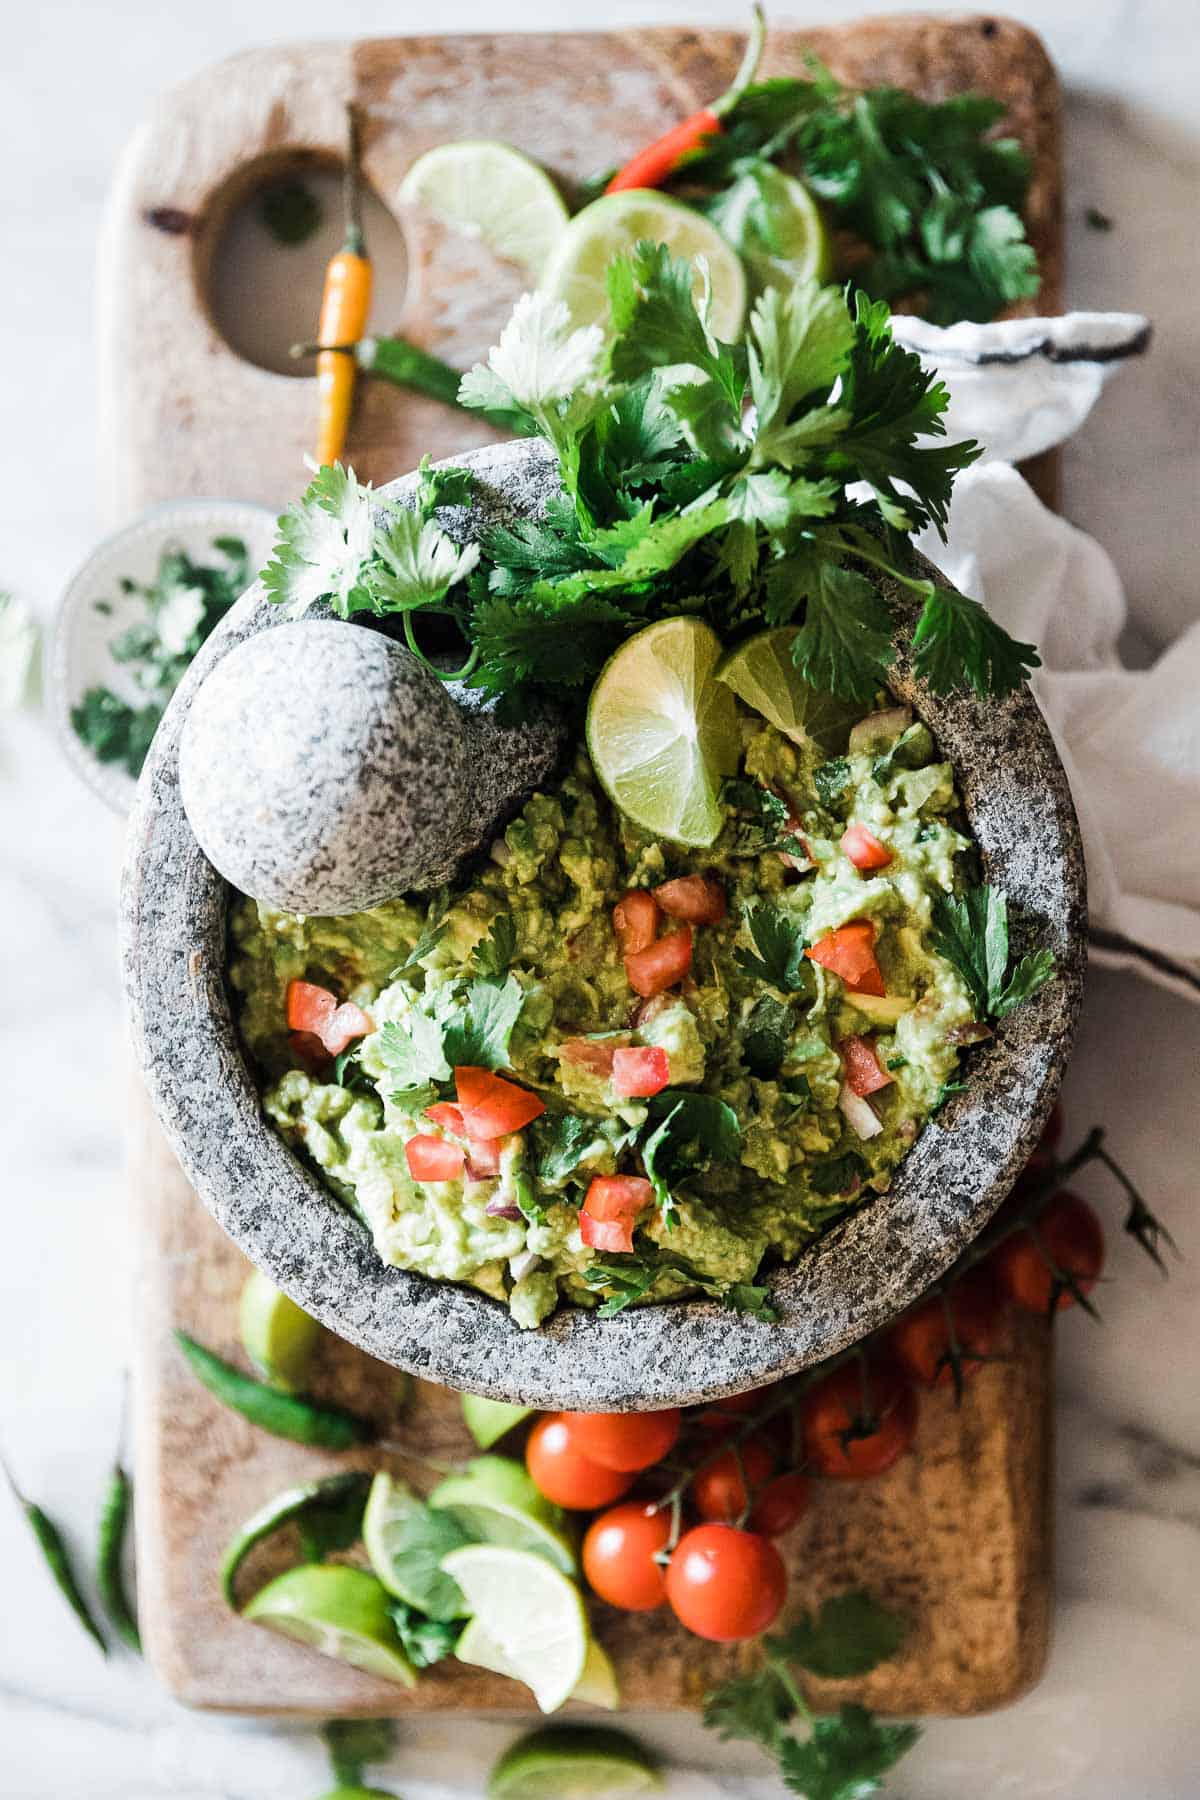 Homemade guacamole recipe in a grey bowl, garnished with cilantro. There are peppers surrounding the bowl.